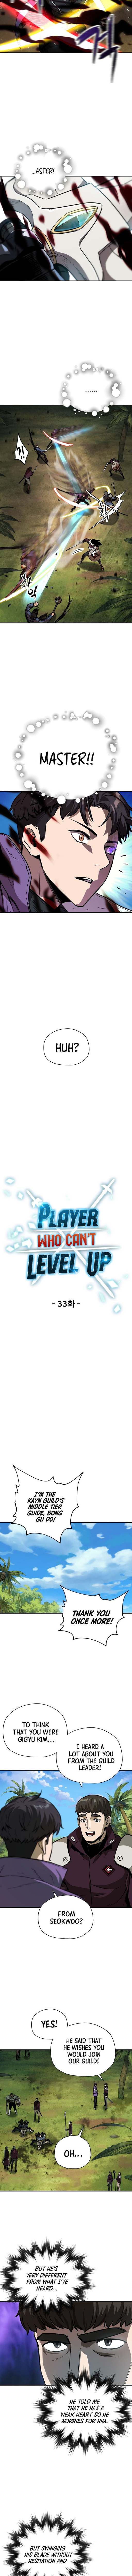 The Player That Can’t Level Up - Chapter 33 Page 4